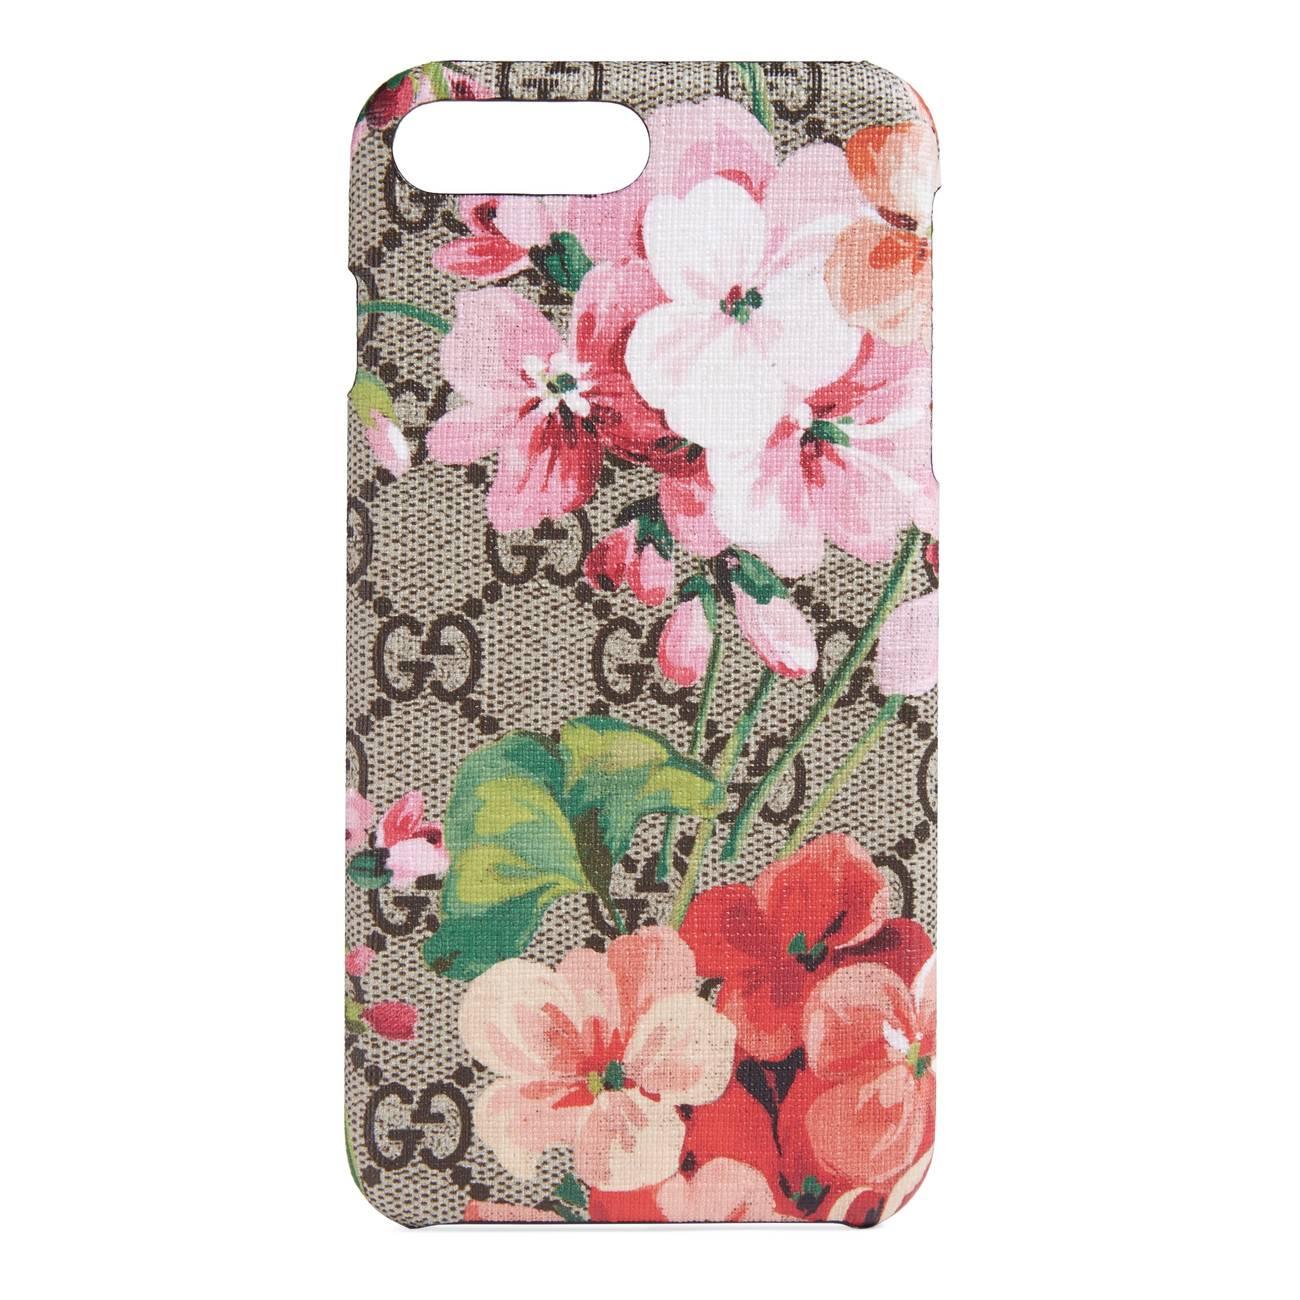 Gucci GG Blooms Iphone 8 Plus Case in Natural - Lyst